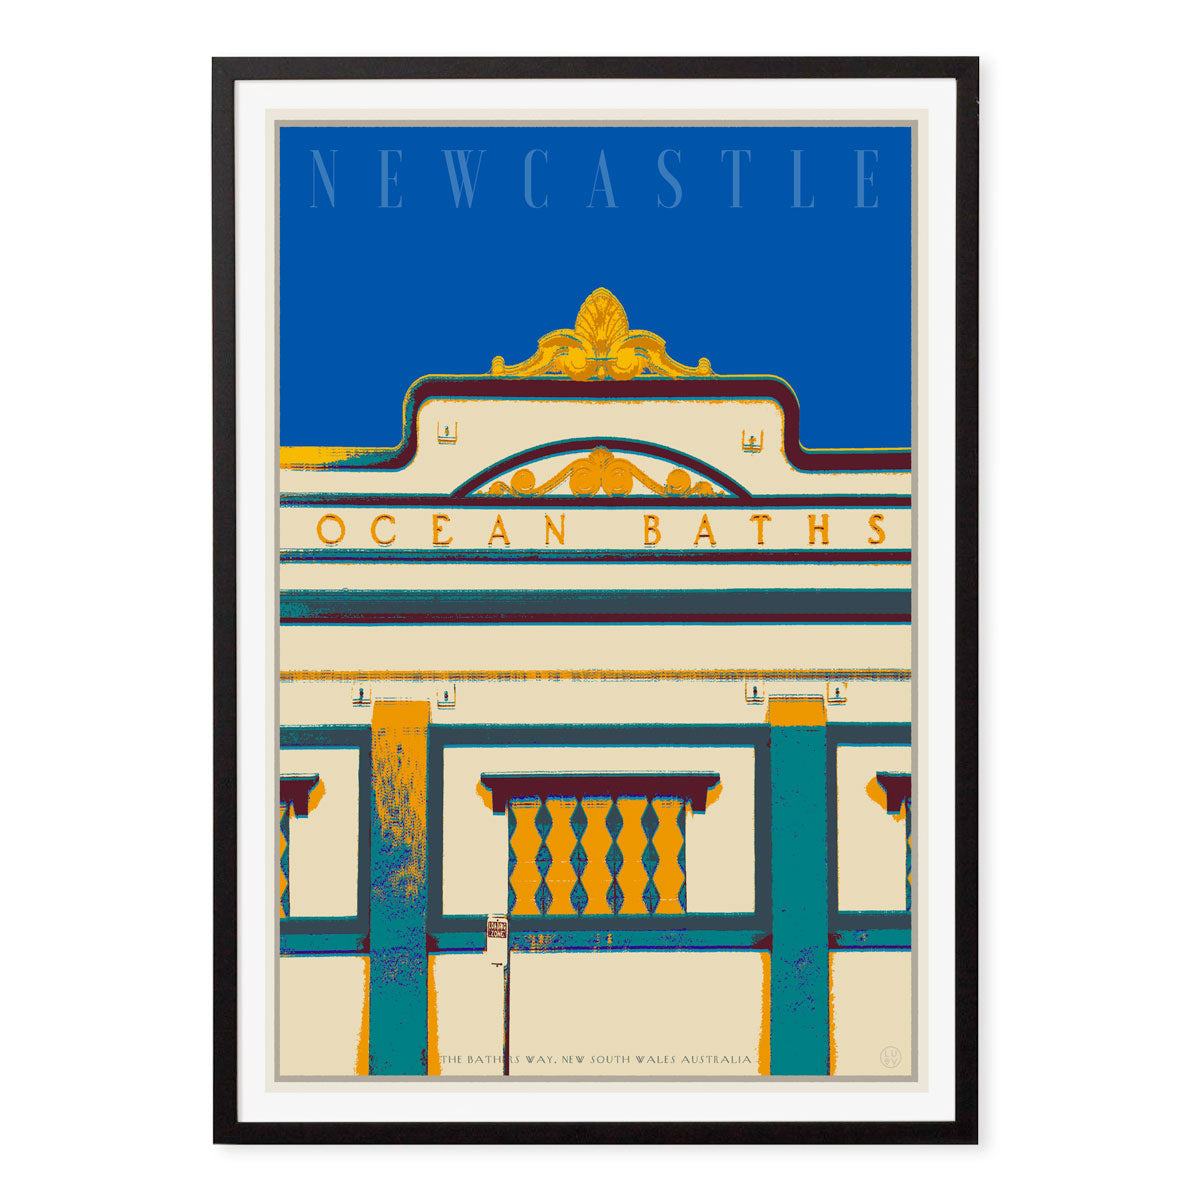 Newcastle baths deco pop travel poster print in black frame by Places We Luv